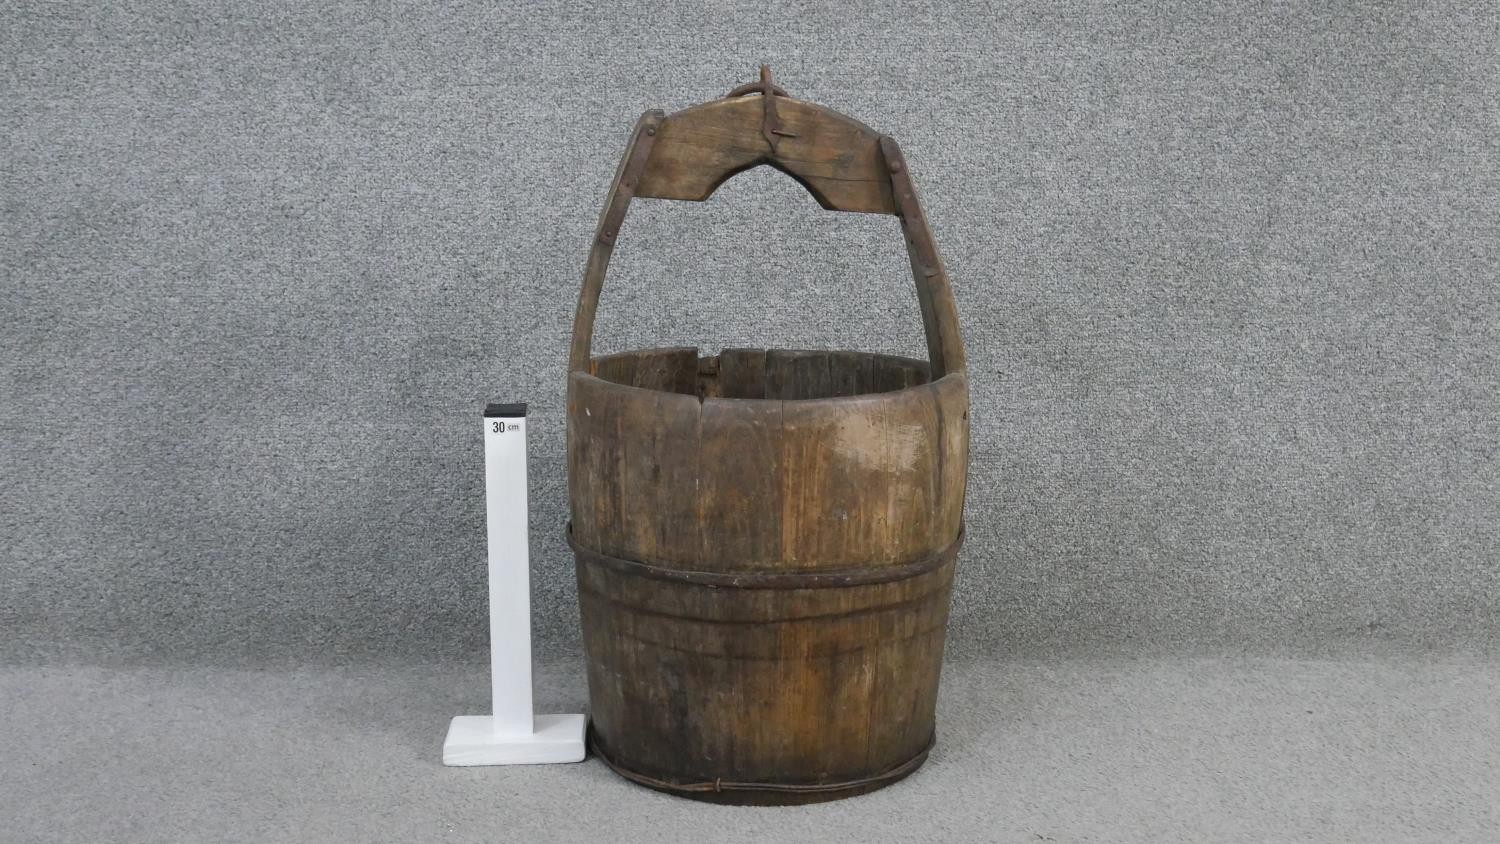 A metal bound well bucket. H.55 Diam.33cm - Image 4 of 4